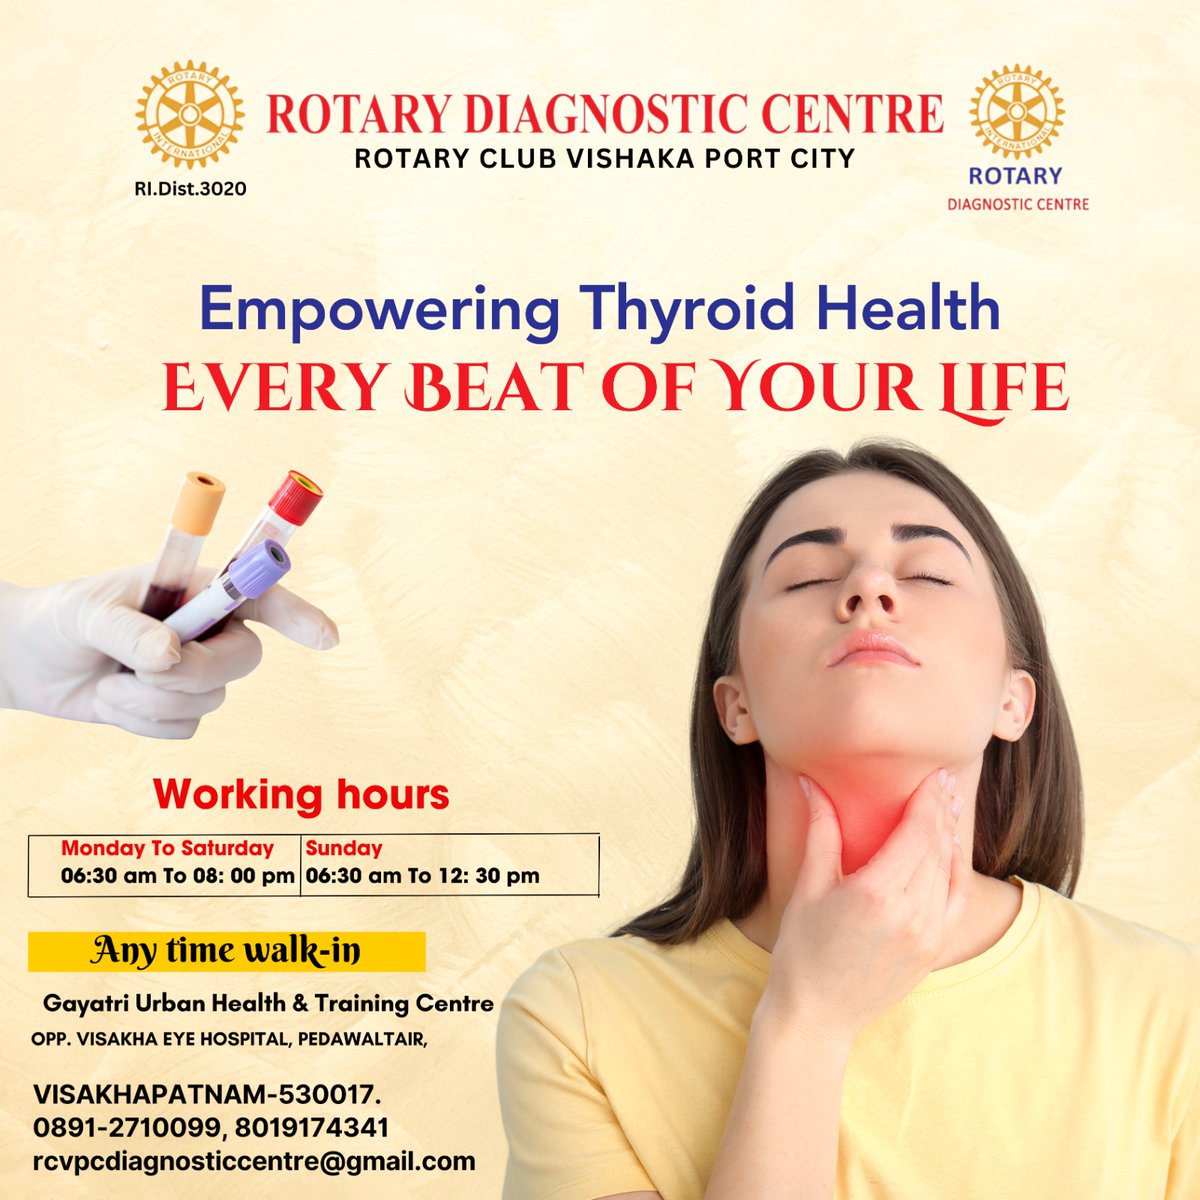 🏥💙 Empower your thyroid health and cherish every beat of your life with Rotary Diagnostic Center!

#ThyroidHealth #Empowerment #RotaryDiagnosticCenter #LipidProfileTest #RotaryDiagnostics #DiabeticCare #BloodSugar #Insulin #HealthyLiving #DiabetesAwareness #Type1 #Type2